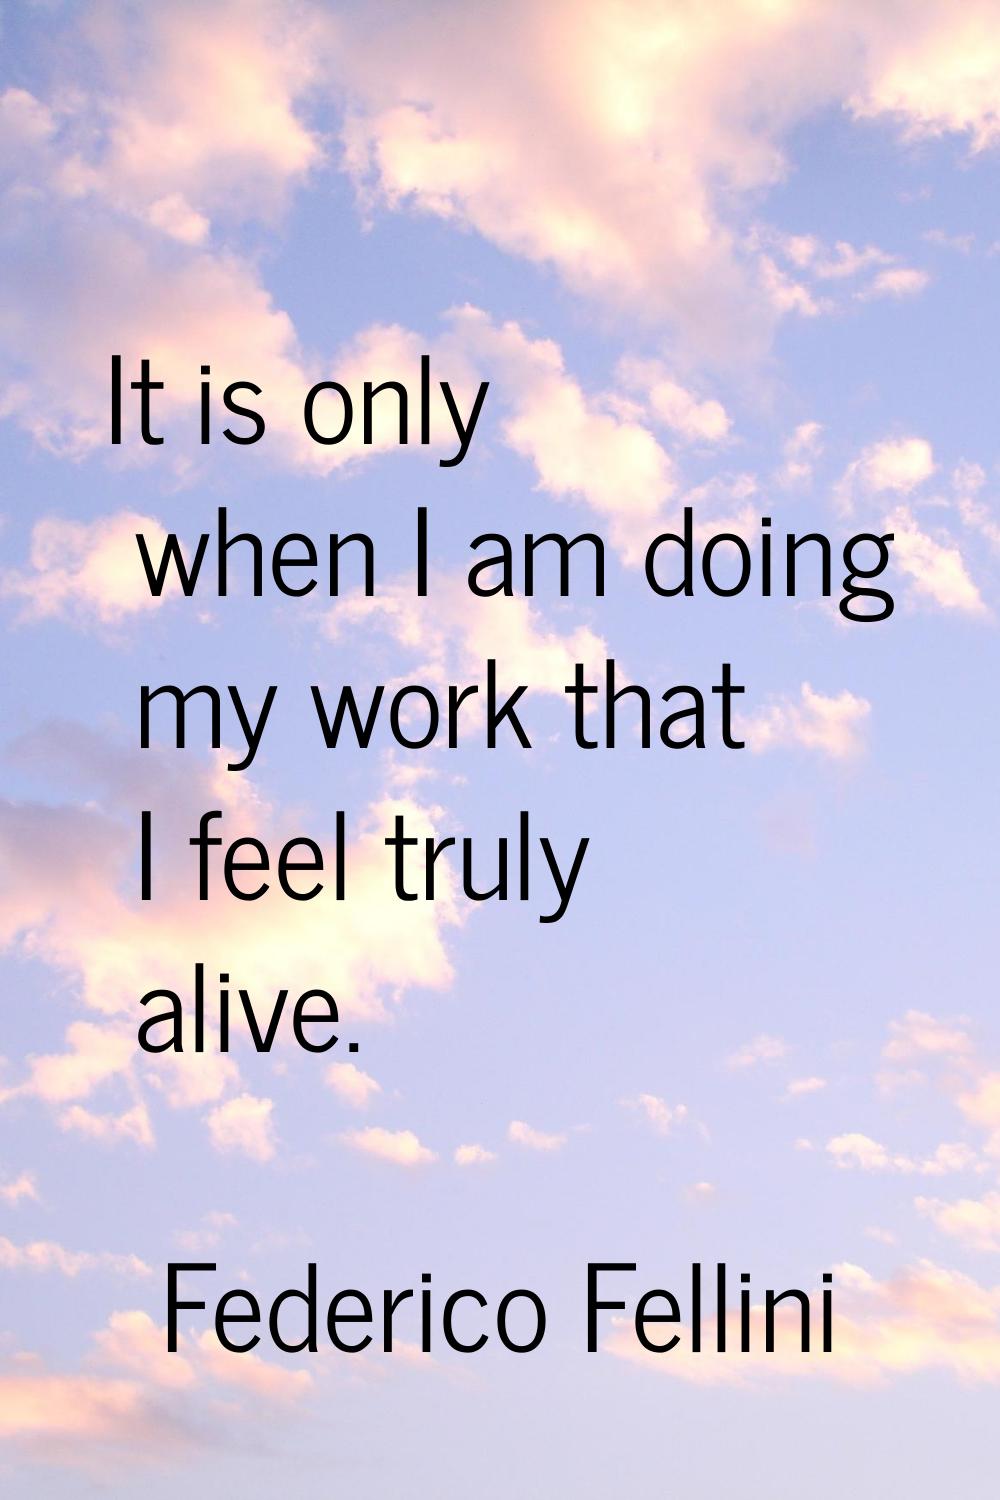 It is only when I am doing my work that I feel truly alive.